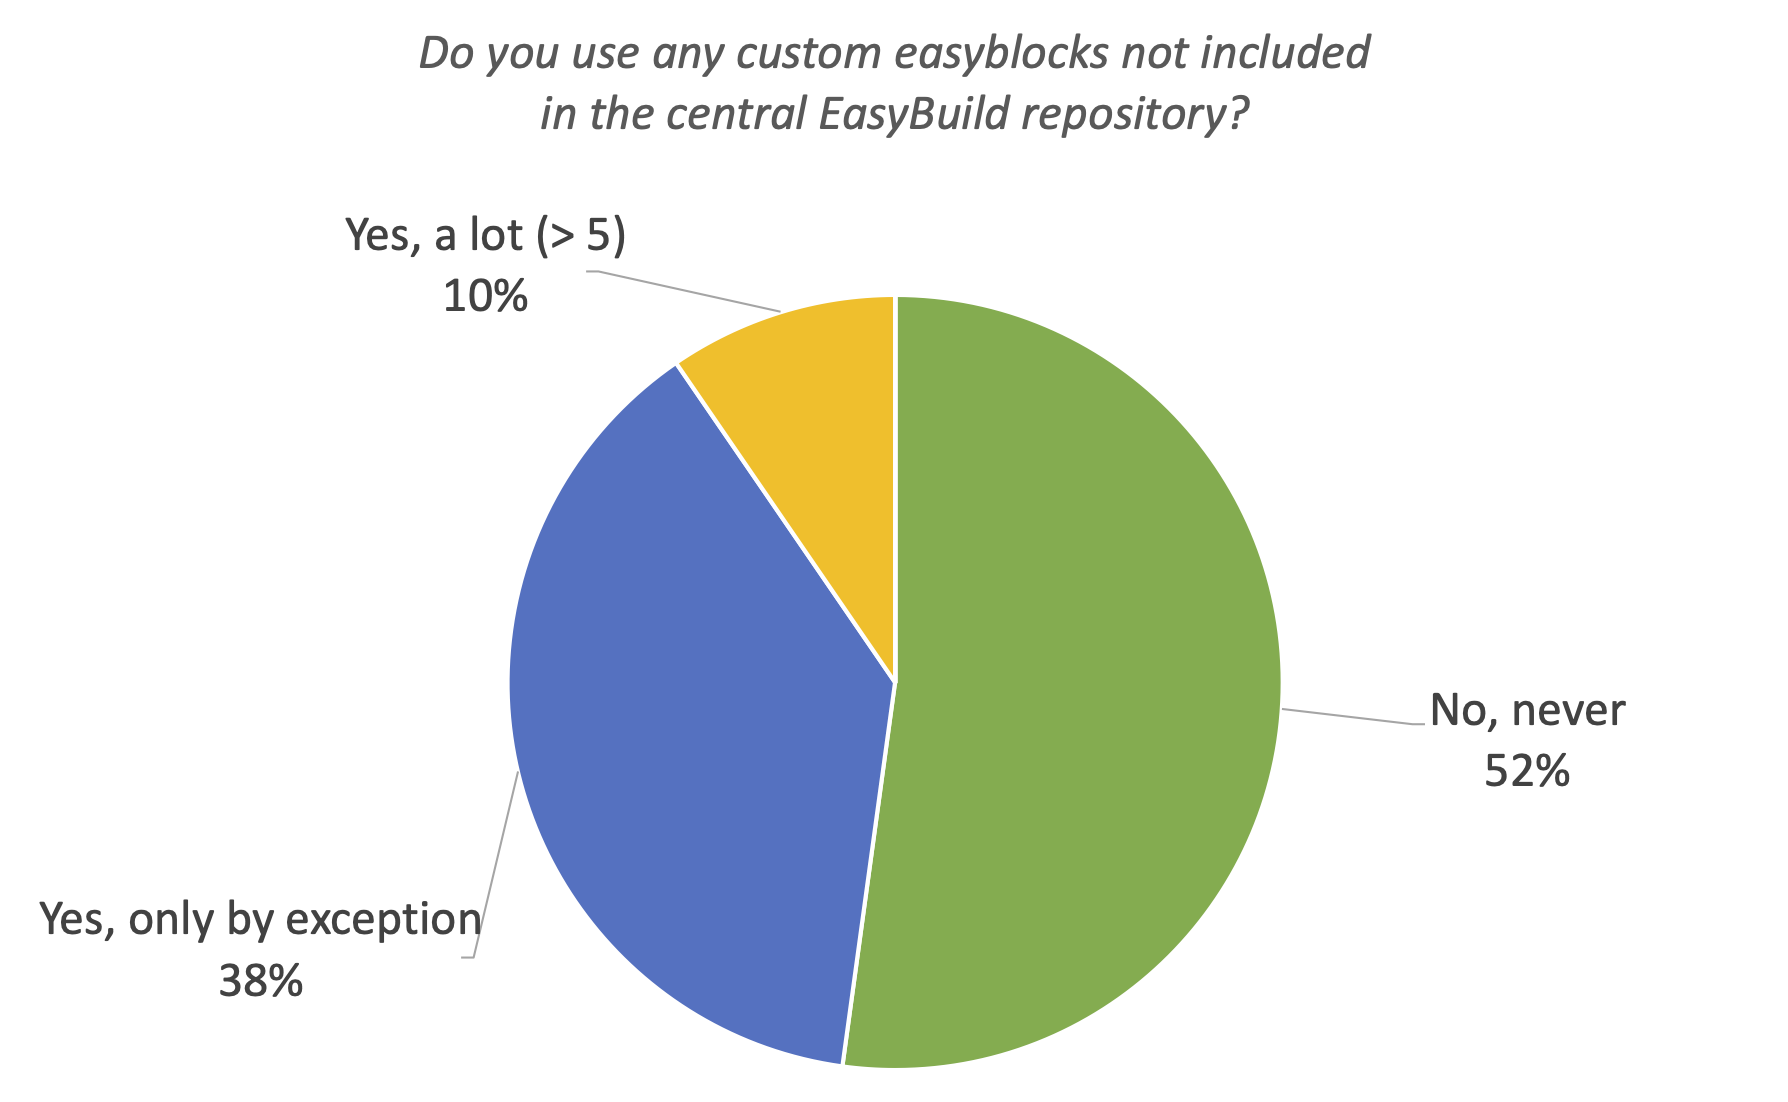 28. Do you use any custom easyblocks not included in the central EasyBuild repository?